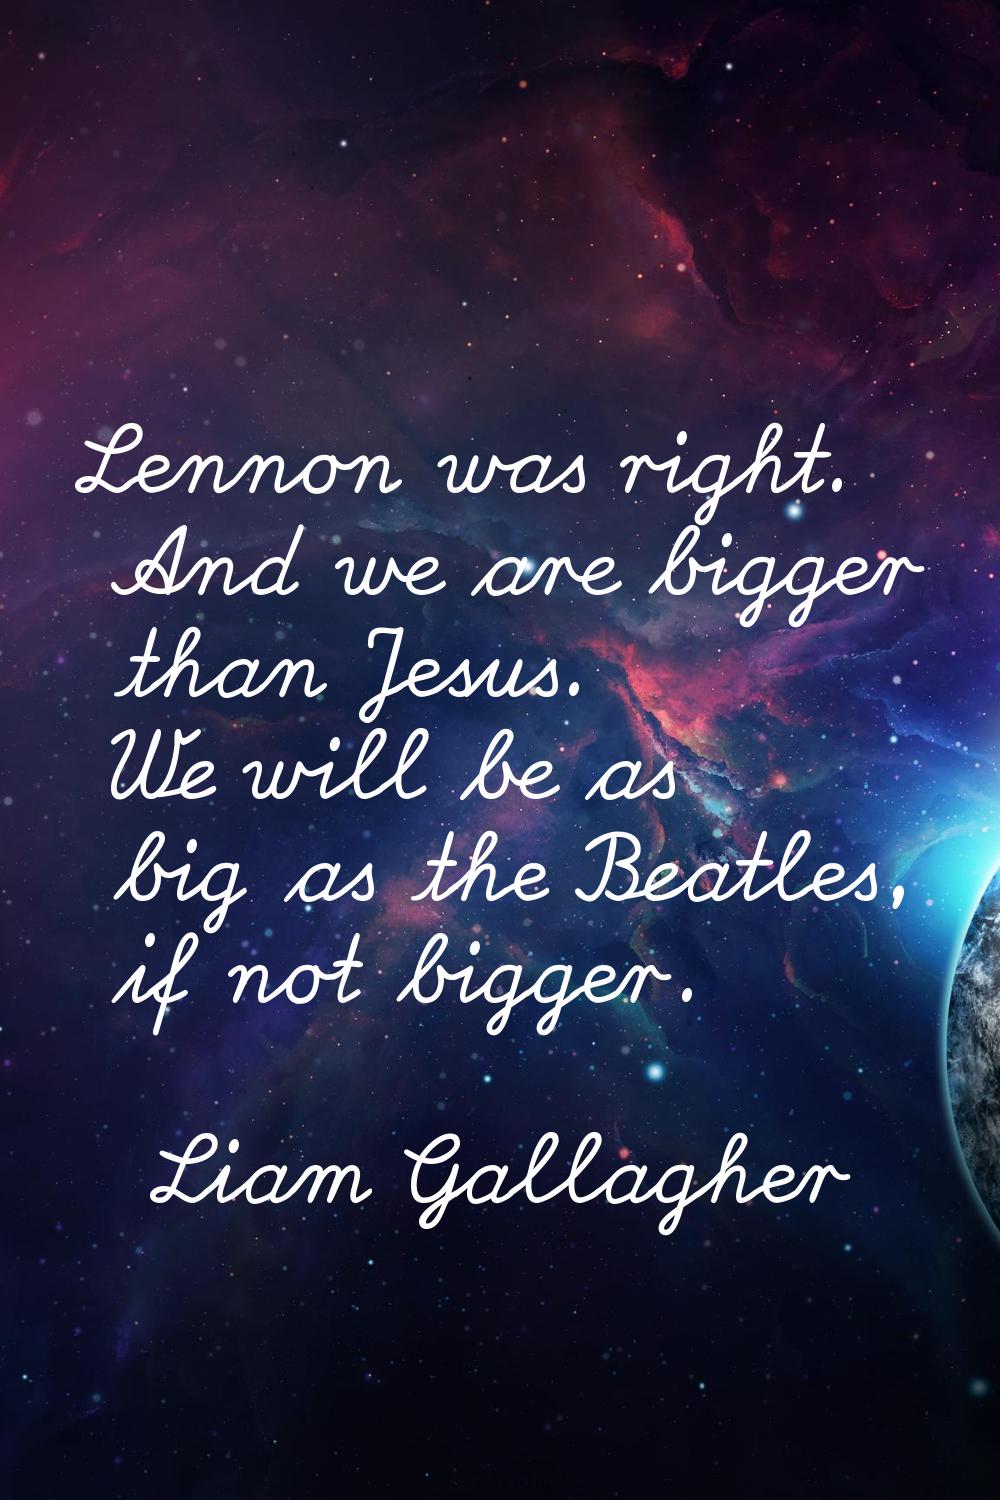 Lennon was right. And we are bigger than Jesus. We will be as big as the Beatles, if not bigger.